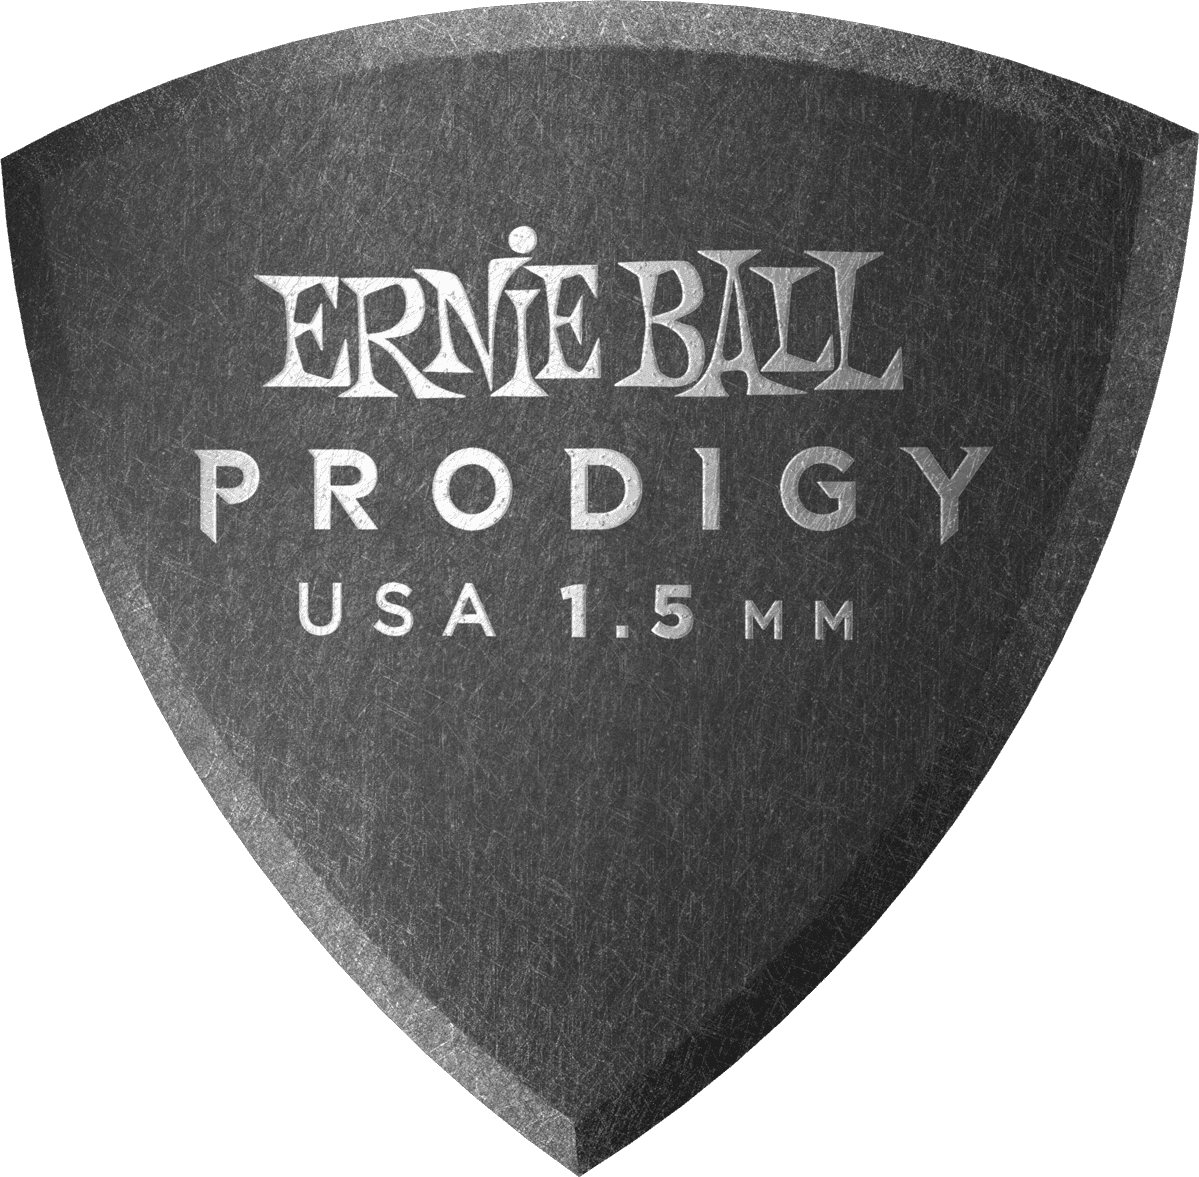 Ernie Ball Prodigy Shield 1,5mm (x6 Pack) - MÉdiator & Onglet - Main picture